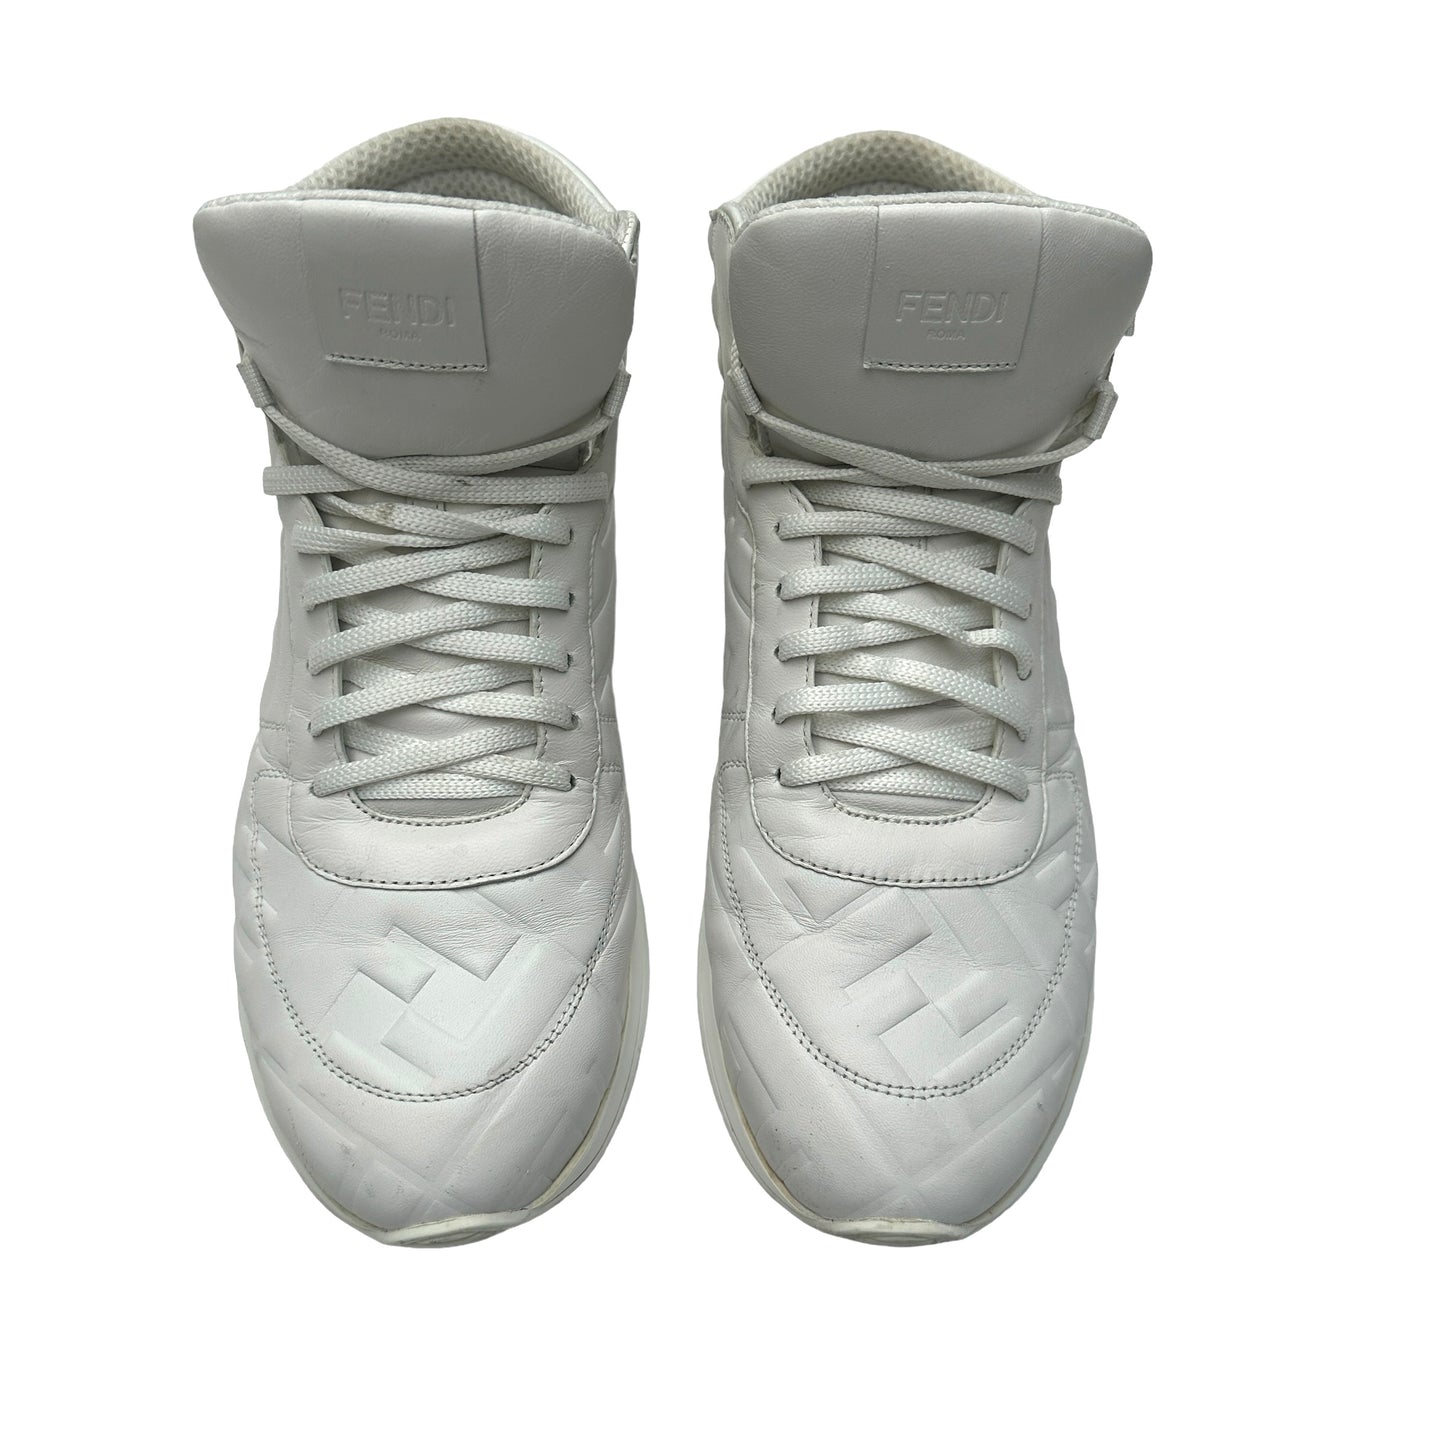 White Leather High Top Sneakers - 10